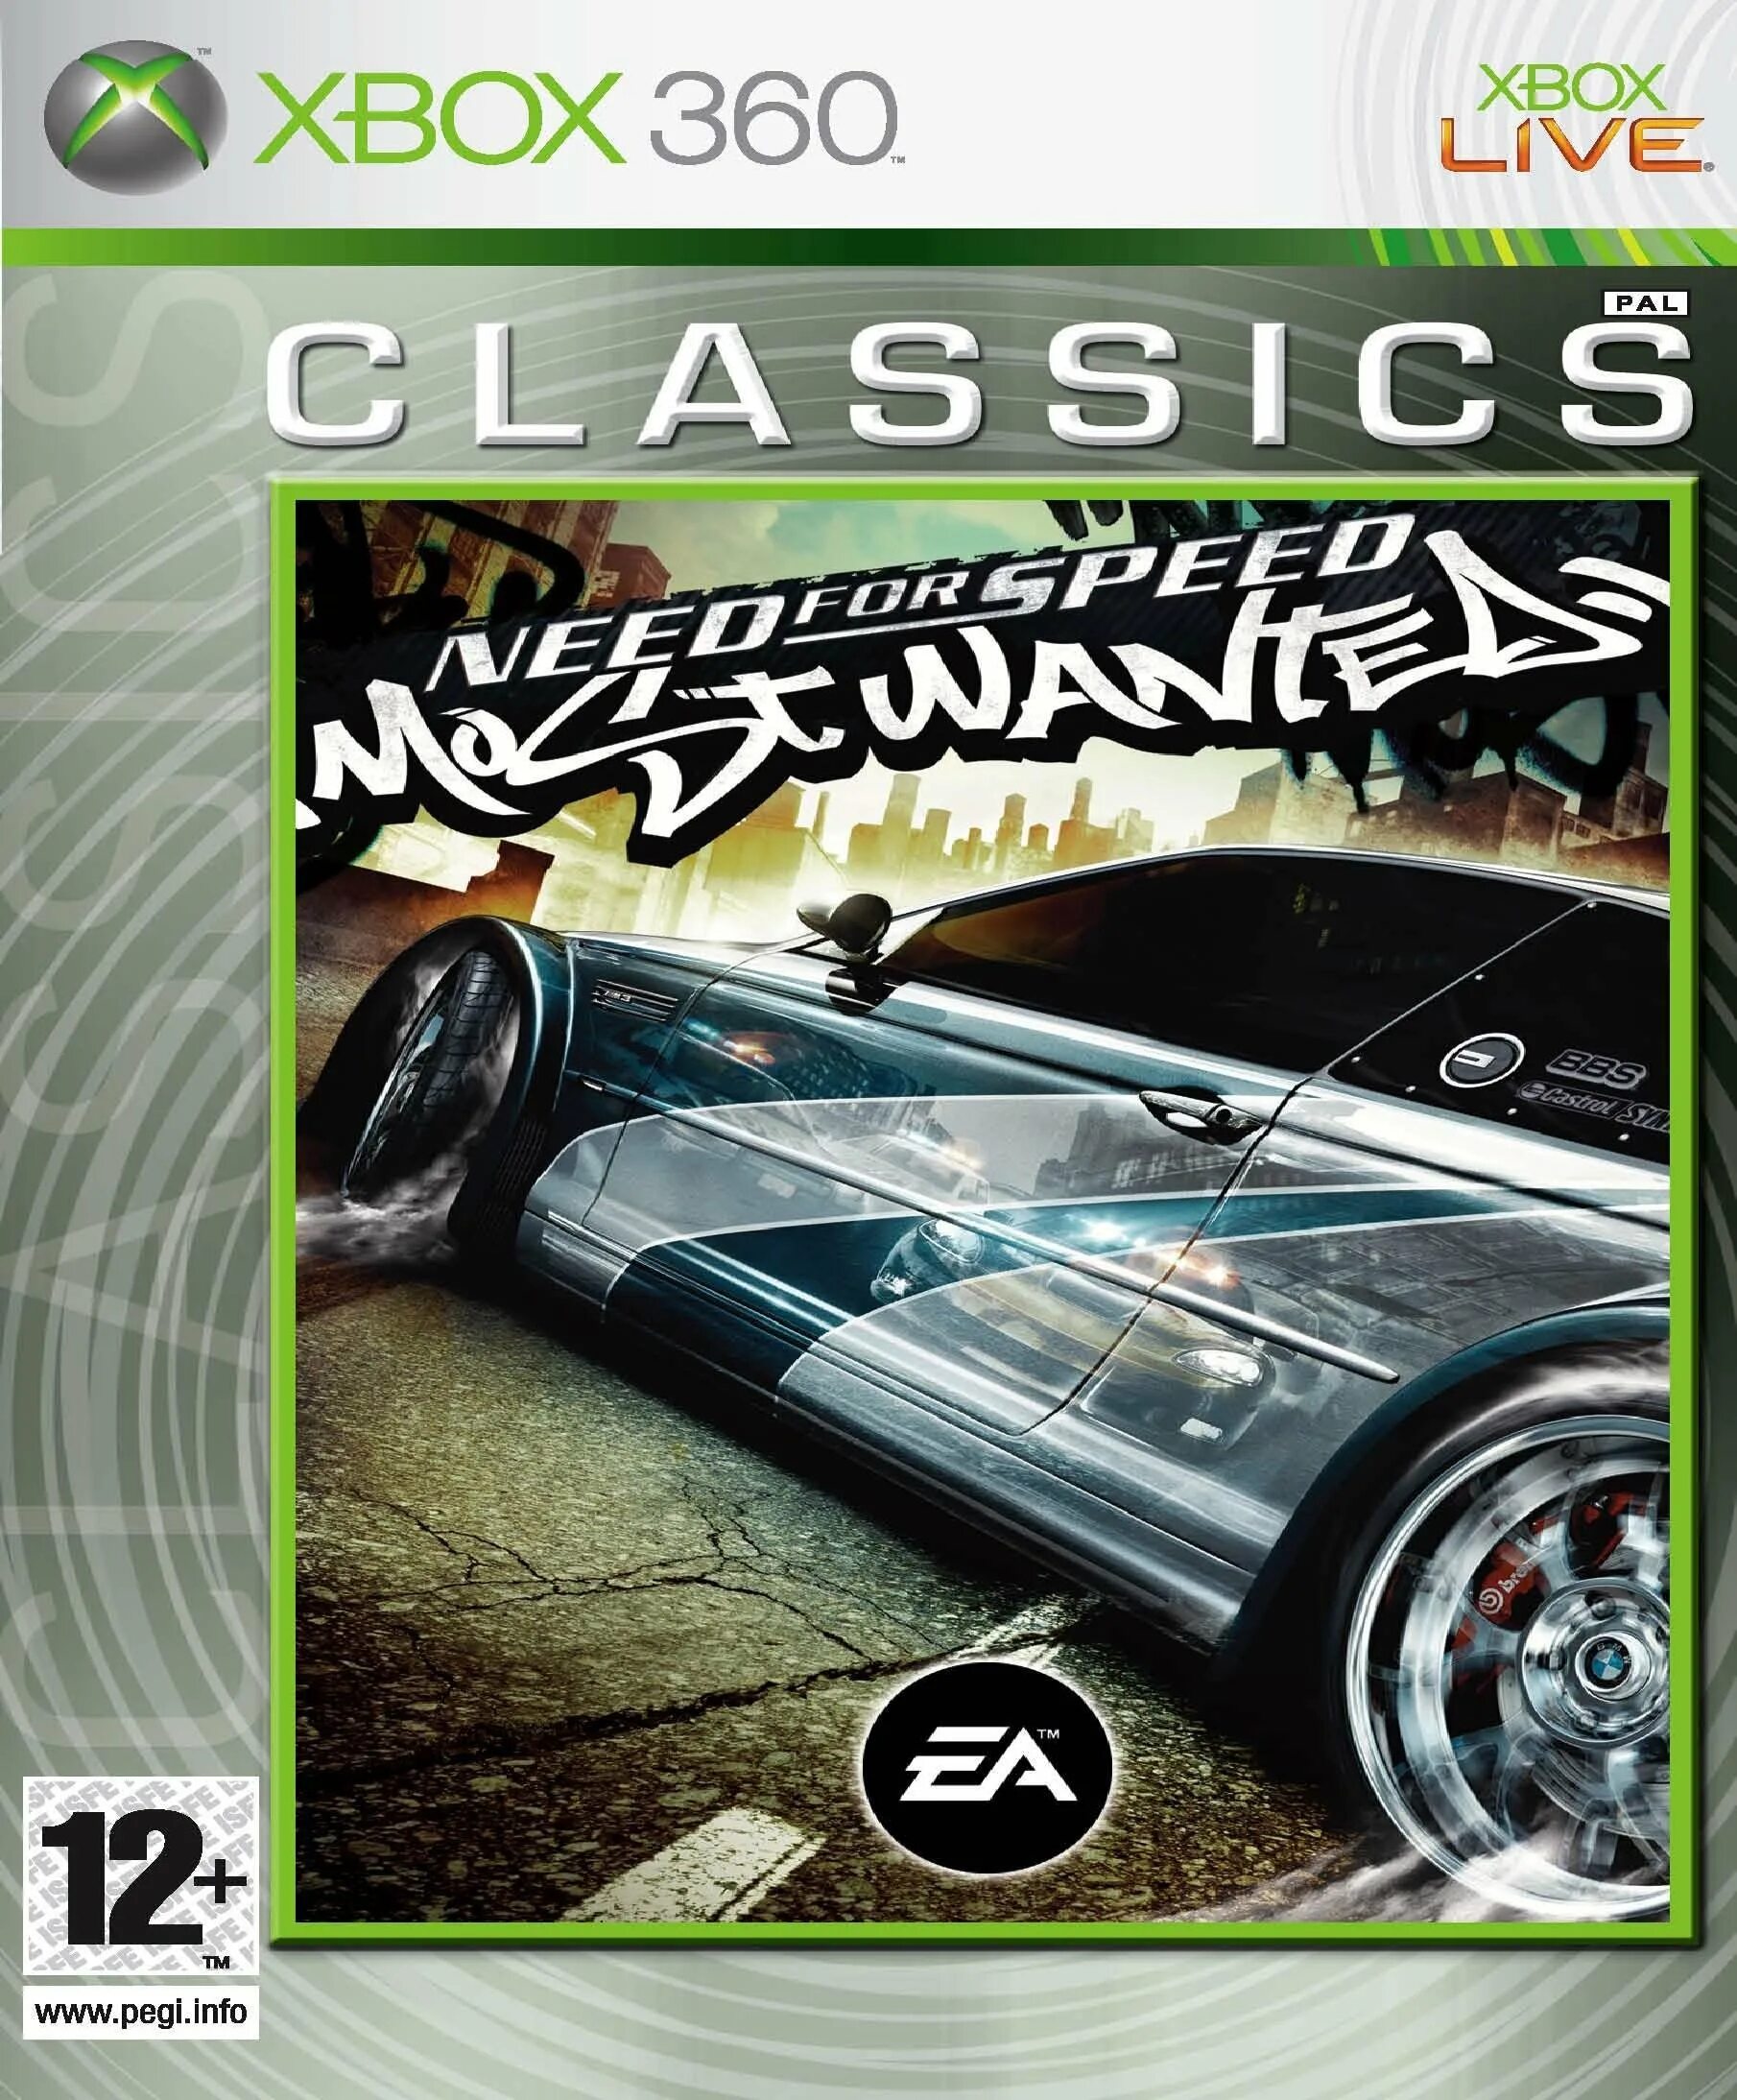 NFS most wanted 2005 Xbox 360. NFS most wanted Xbox 360. NFS most wanted диск Xbox 360. Приставка игровая Xbox 360 need for Speed. Nfs most wanted xbox